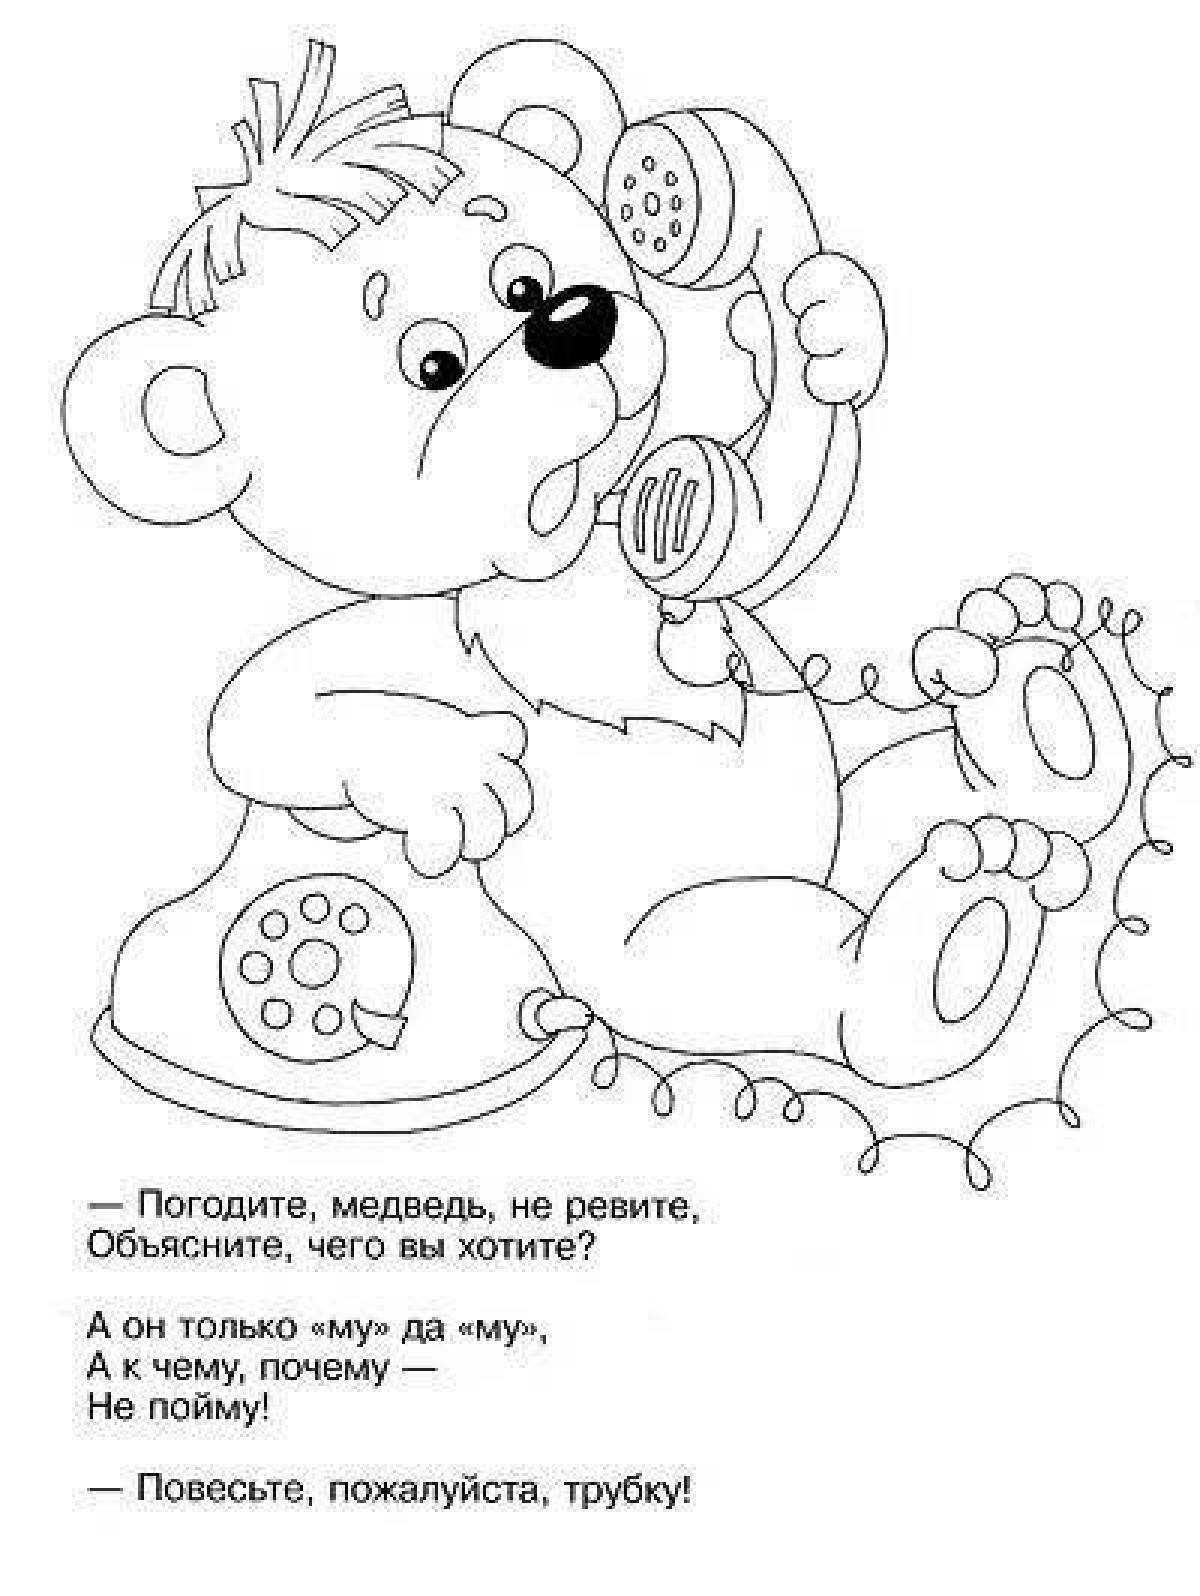 Fancy Chukovsky phone coloring book